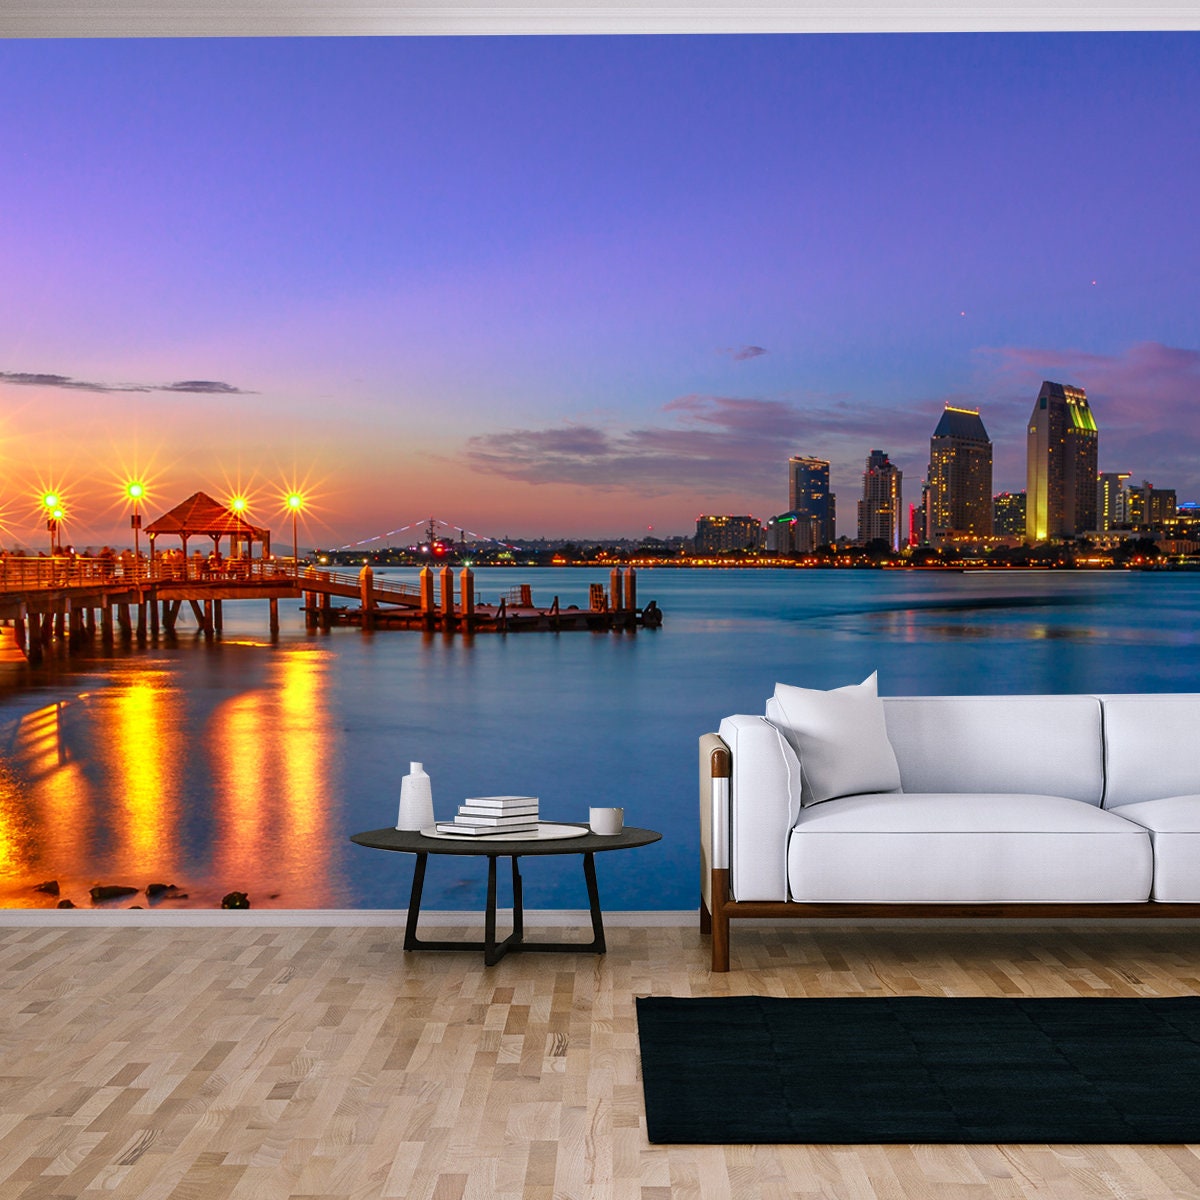 San Diego Cityscape Skyline with Downtown and Waterfront Marina District at Twilight on Background Wallpaper Living Room Mural